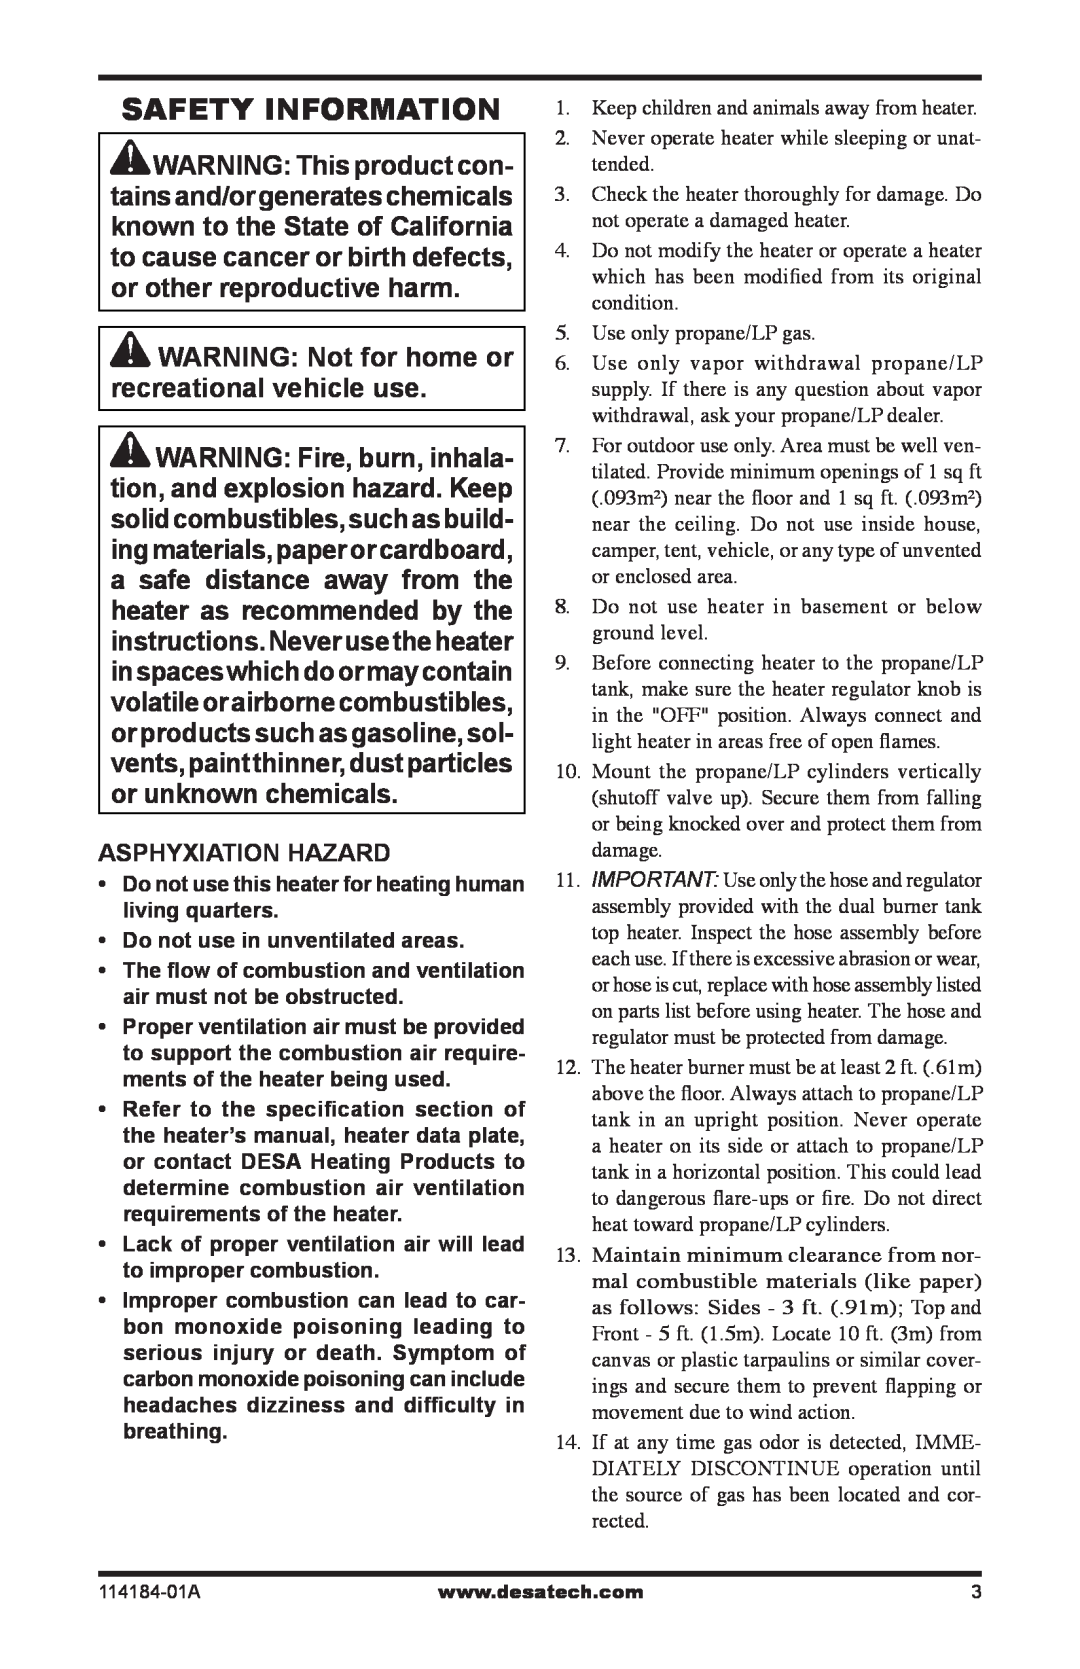 Desa SPC-15RB, TT15, SPC-30RB, N15 Safety Information, WARNING Not for home or recreational vehicle use, Asphyxiation Hazard 